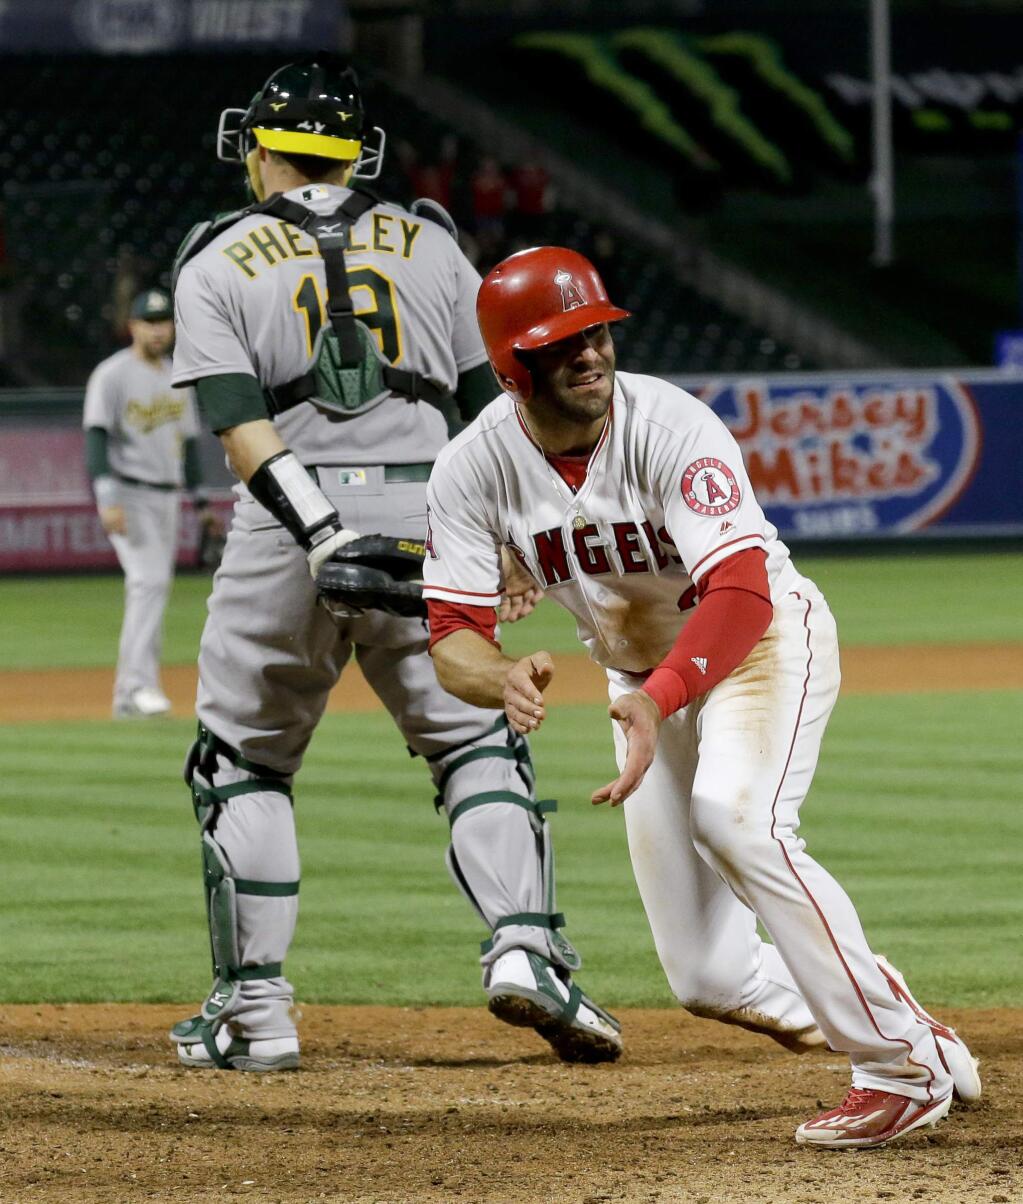 Los Angeles Angels' Danny Espinosa celebrates after scoring the game-winning run on Kole Calhoun's single against the Oakland Athletics during the 11th inning of a baseball game in Anaheim, Calif., Tuesday, April 25, 2017. The Angels won 2-1. (AP Photo/Chris Carlson)